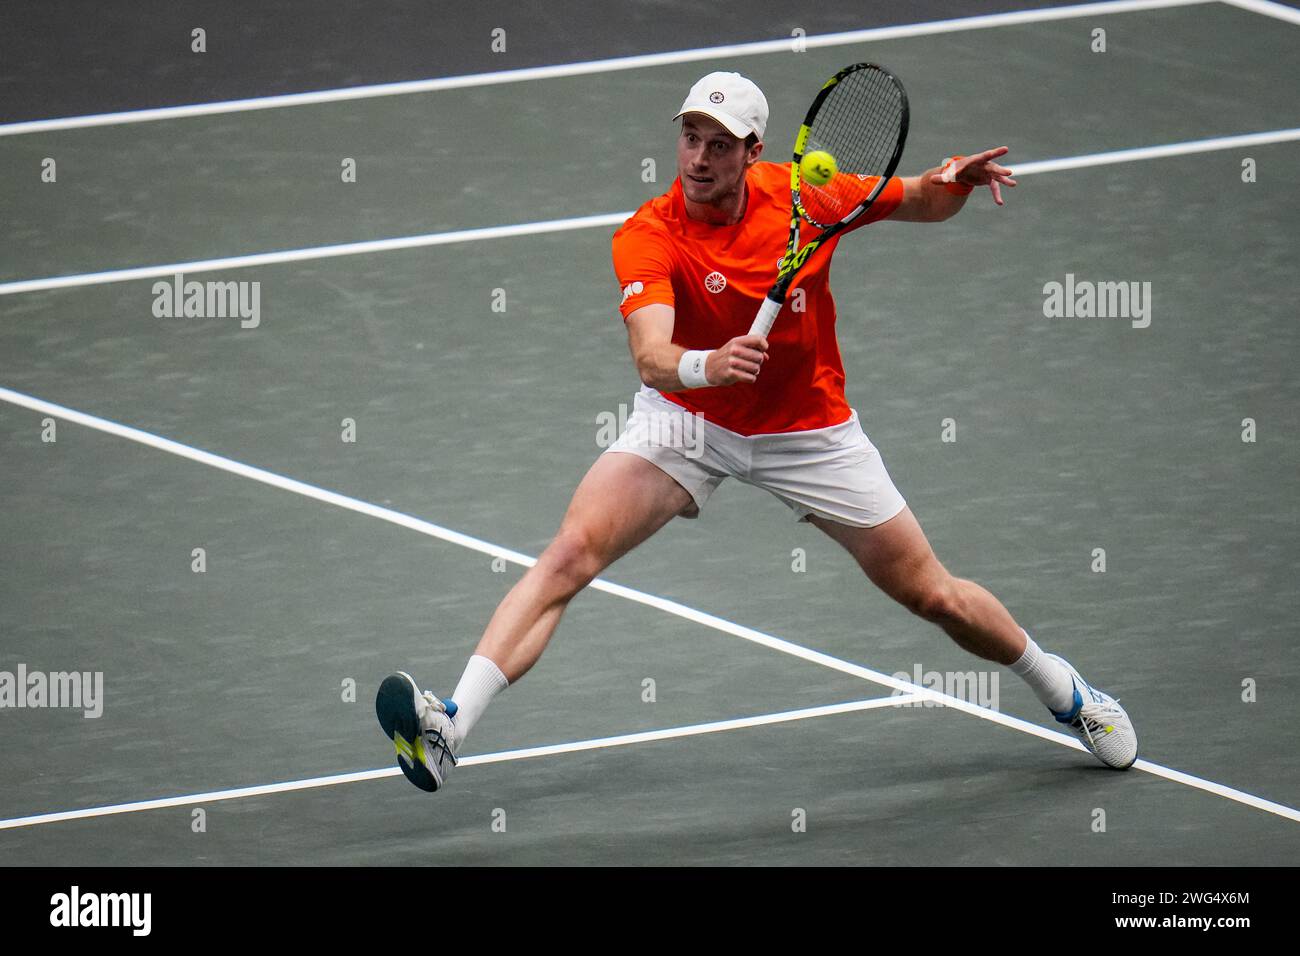 Groningen, Netherlands. 02nd Feb, 2024. GRONINGEN, NETHERLANDS - FEBRUARY 2: Botic van de Zandschulp of the Netherlands plays a backhand volley in his singles match against Leandro Riedi of Switzerland during day 1 of the 2024 Davis Cup Qualifiers match between Netherlands and Switzerland at the Martiniplaza on February 2, 2024 in Groningen, Netherlands. (Photo by Rene Nijhuis/BSR Agency) Credit: BSR Agency/Alamy Live News Stock Photo